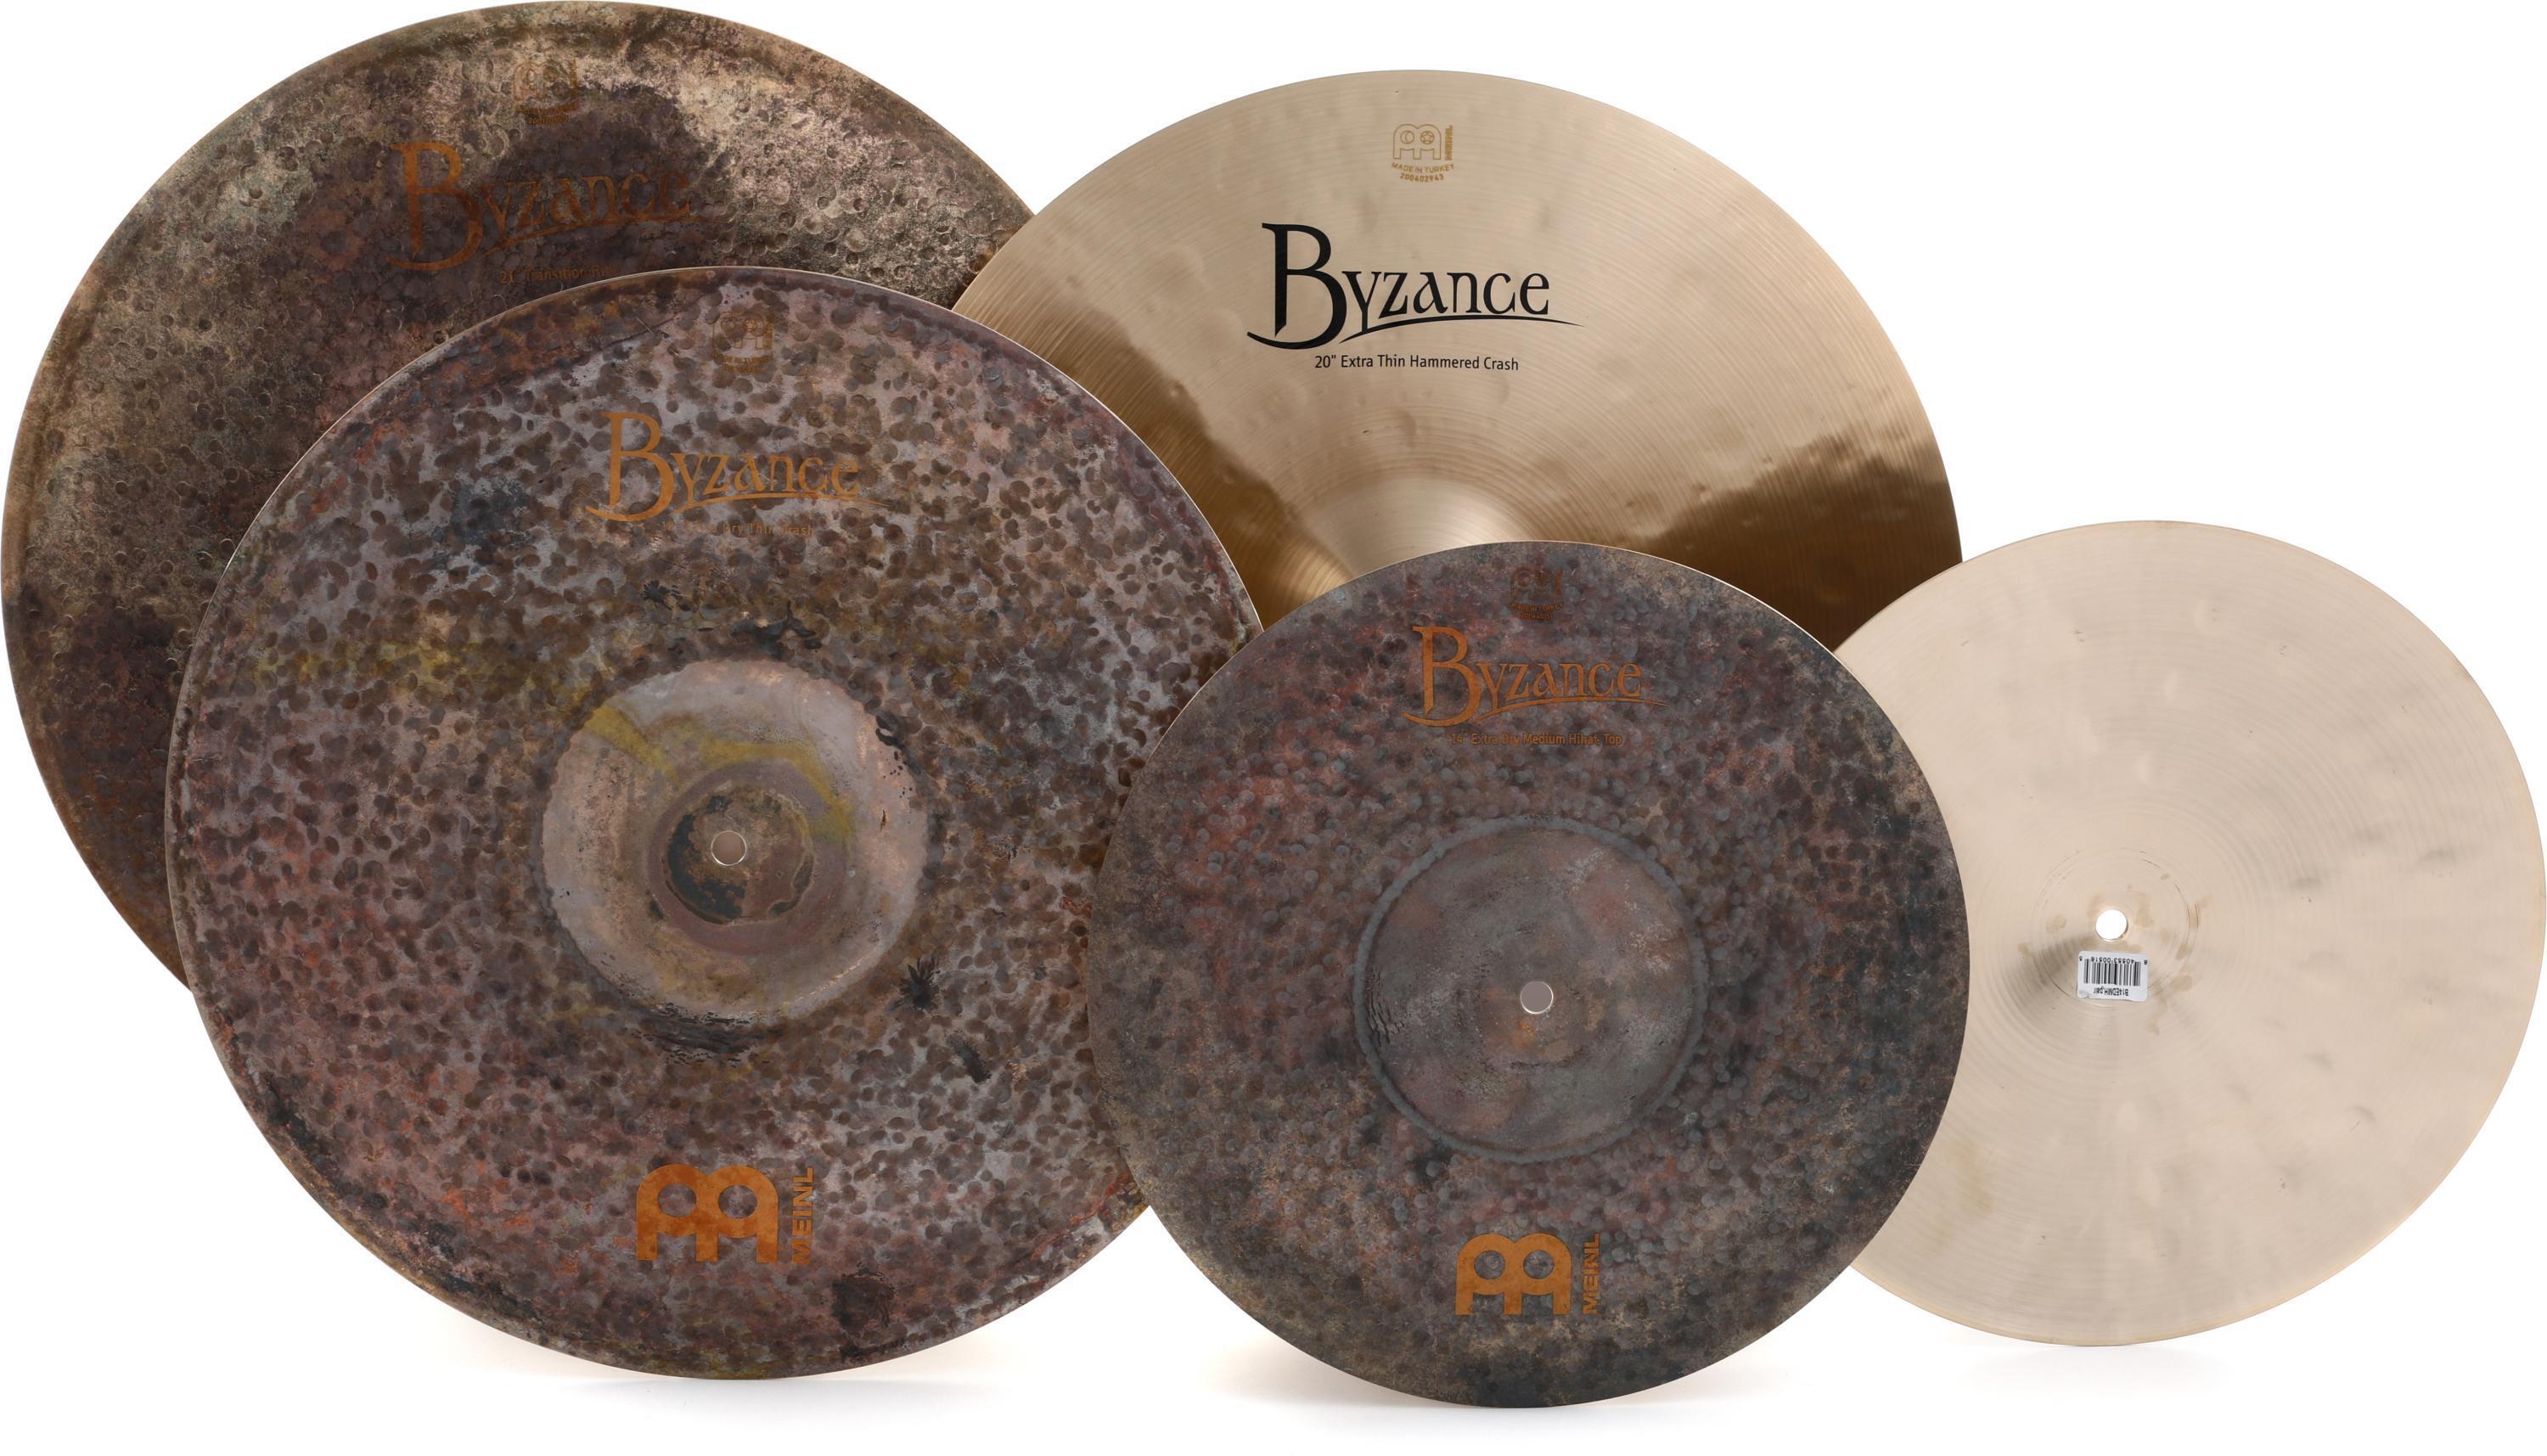 Meinl Cymbals Mike Johnston Byzance Set - 14/20/21 inch - with